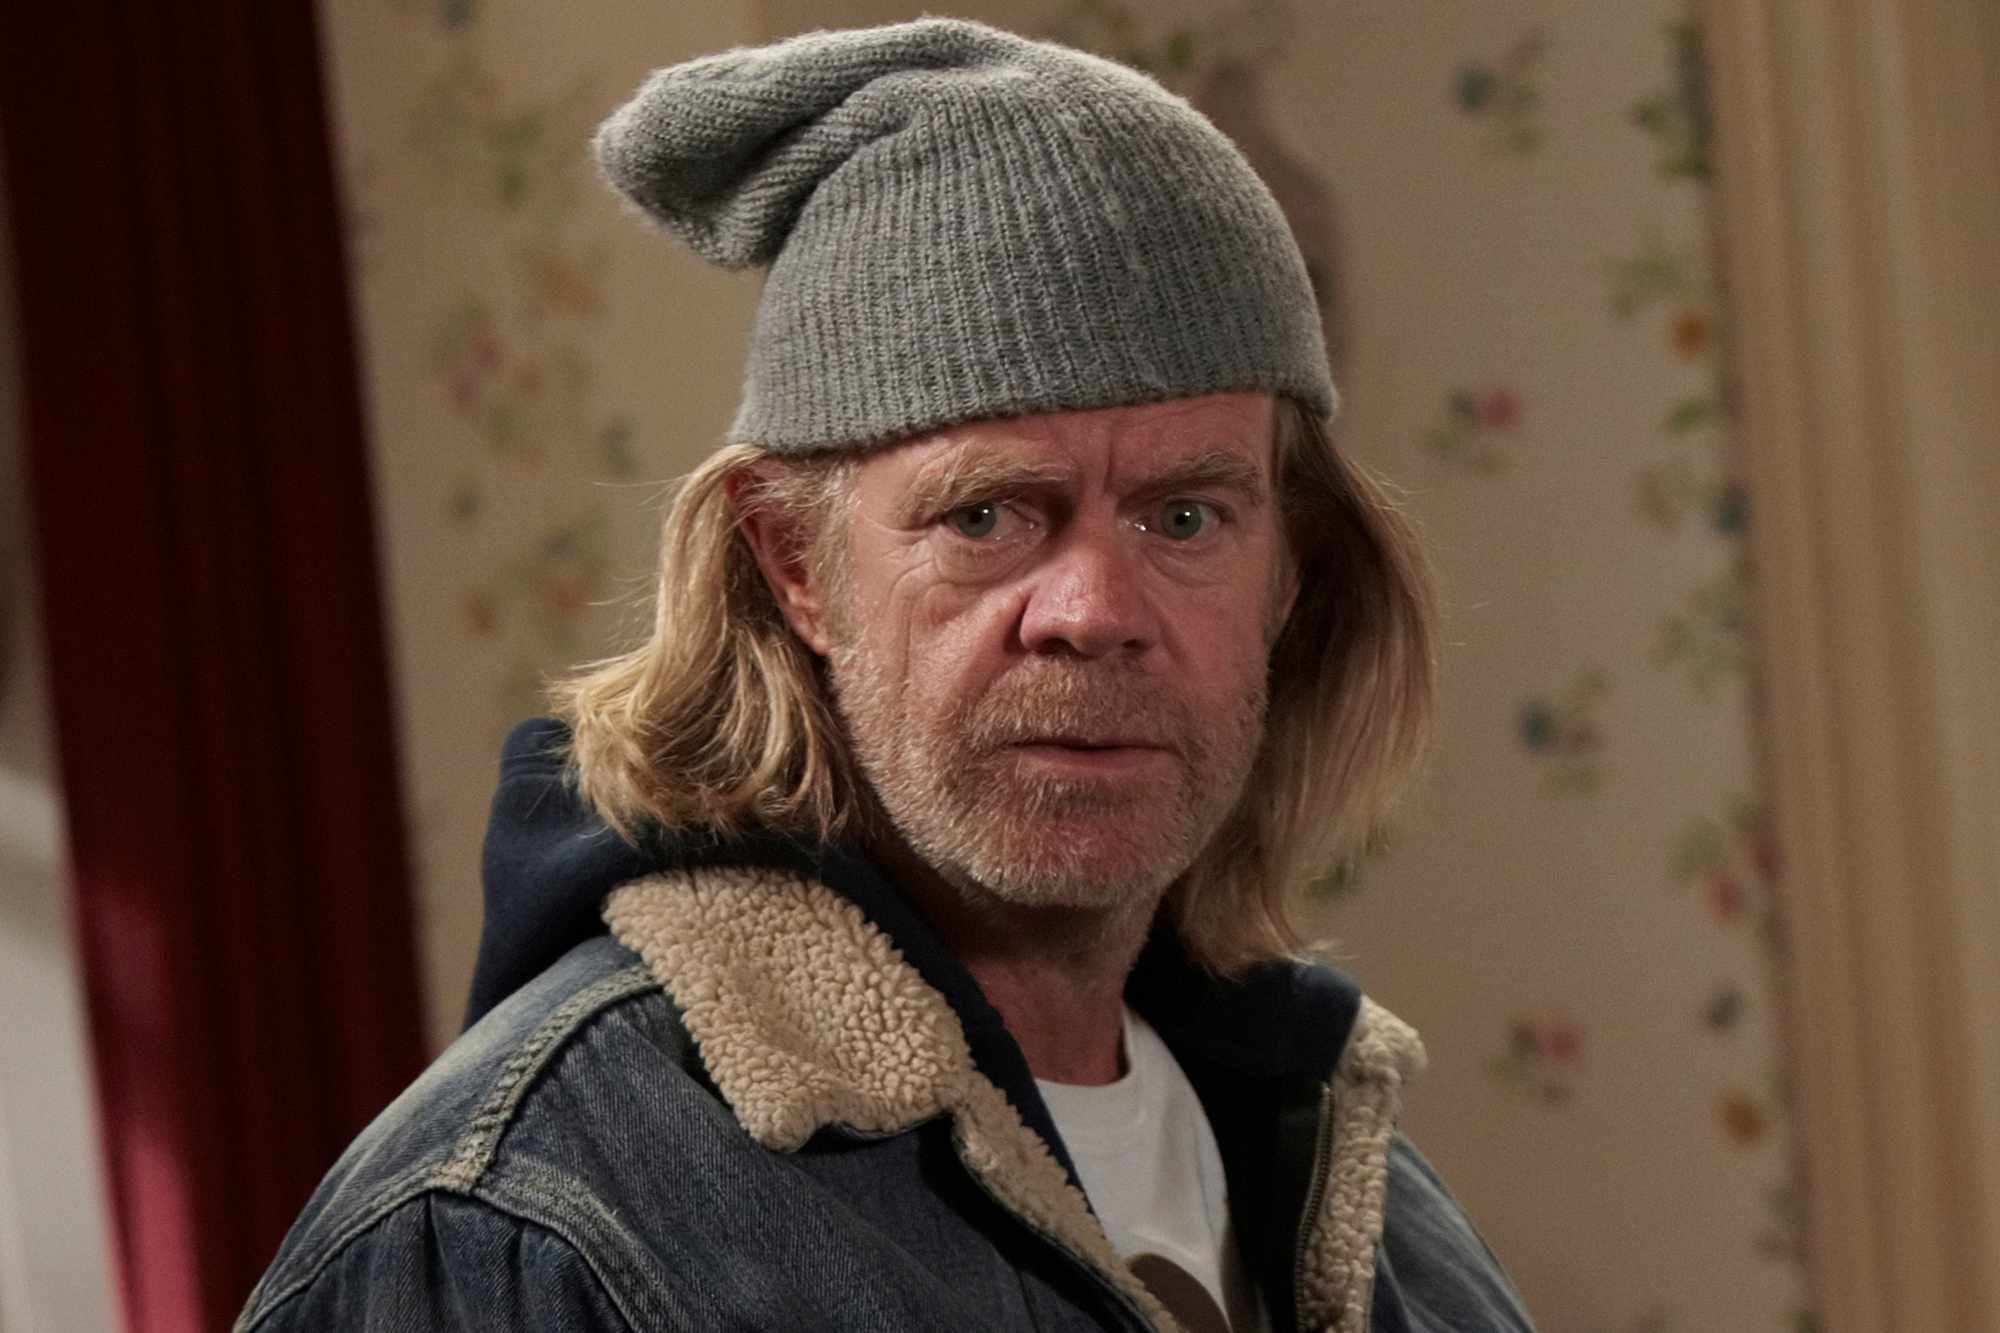 William H. Macy Says He's 'Very Proud' of His Former “Shameless” Kids' Post-Show Success: I 'Miss Them'